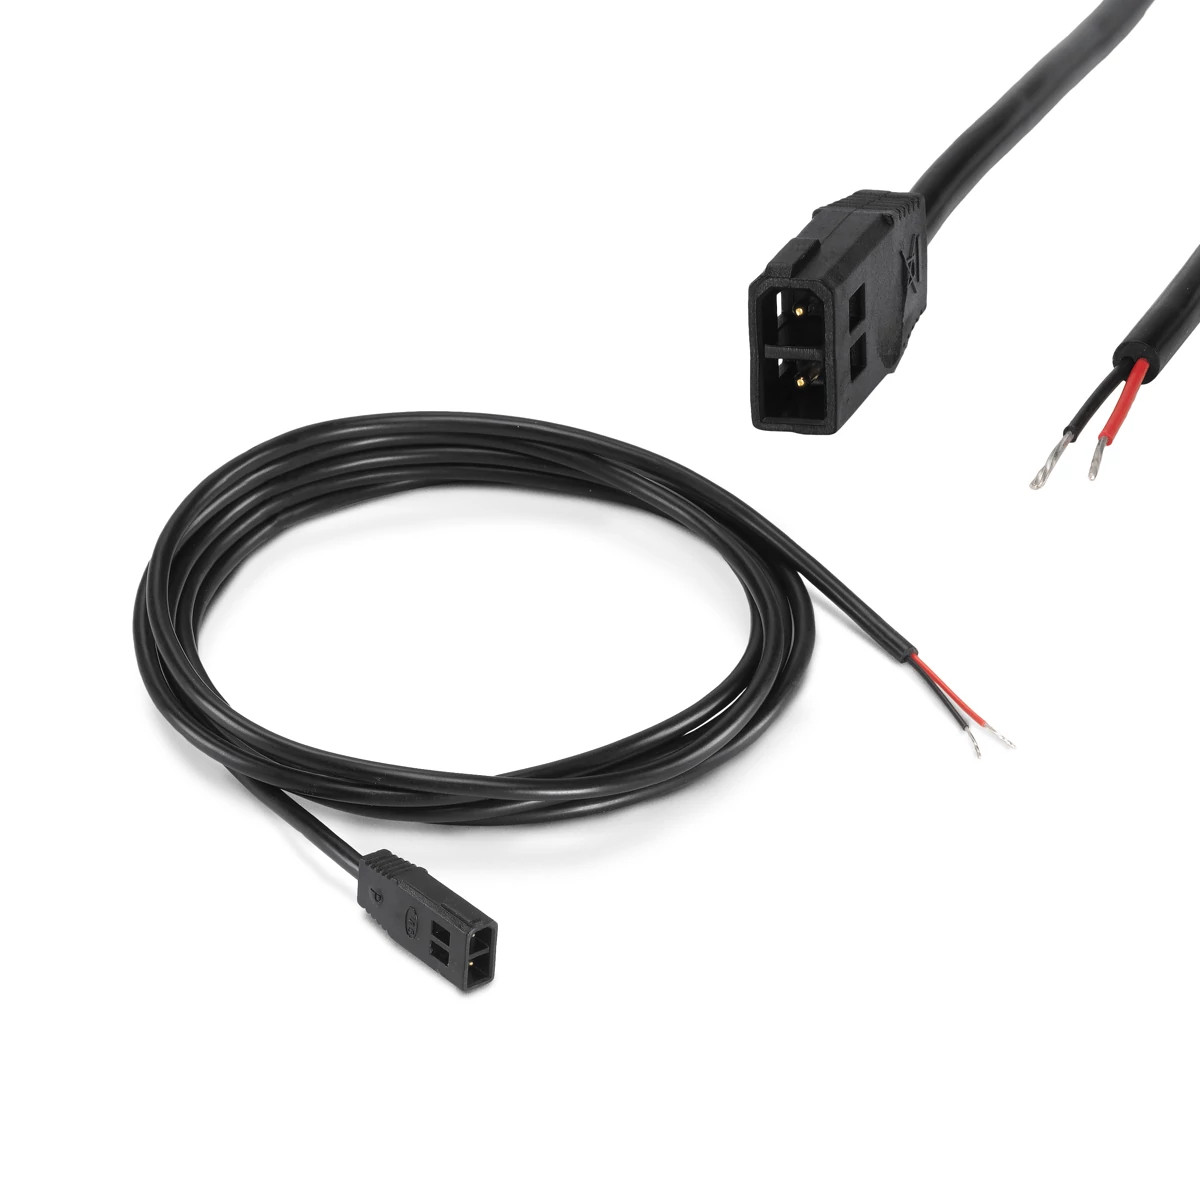 Humminbird New Cables And Accessories humminbird 720073-2 Cable 10' Model AS EC 10 E 